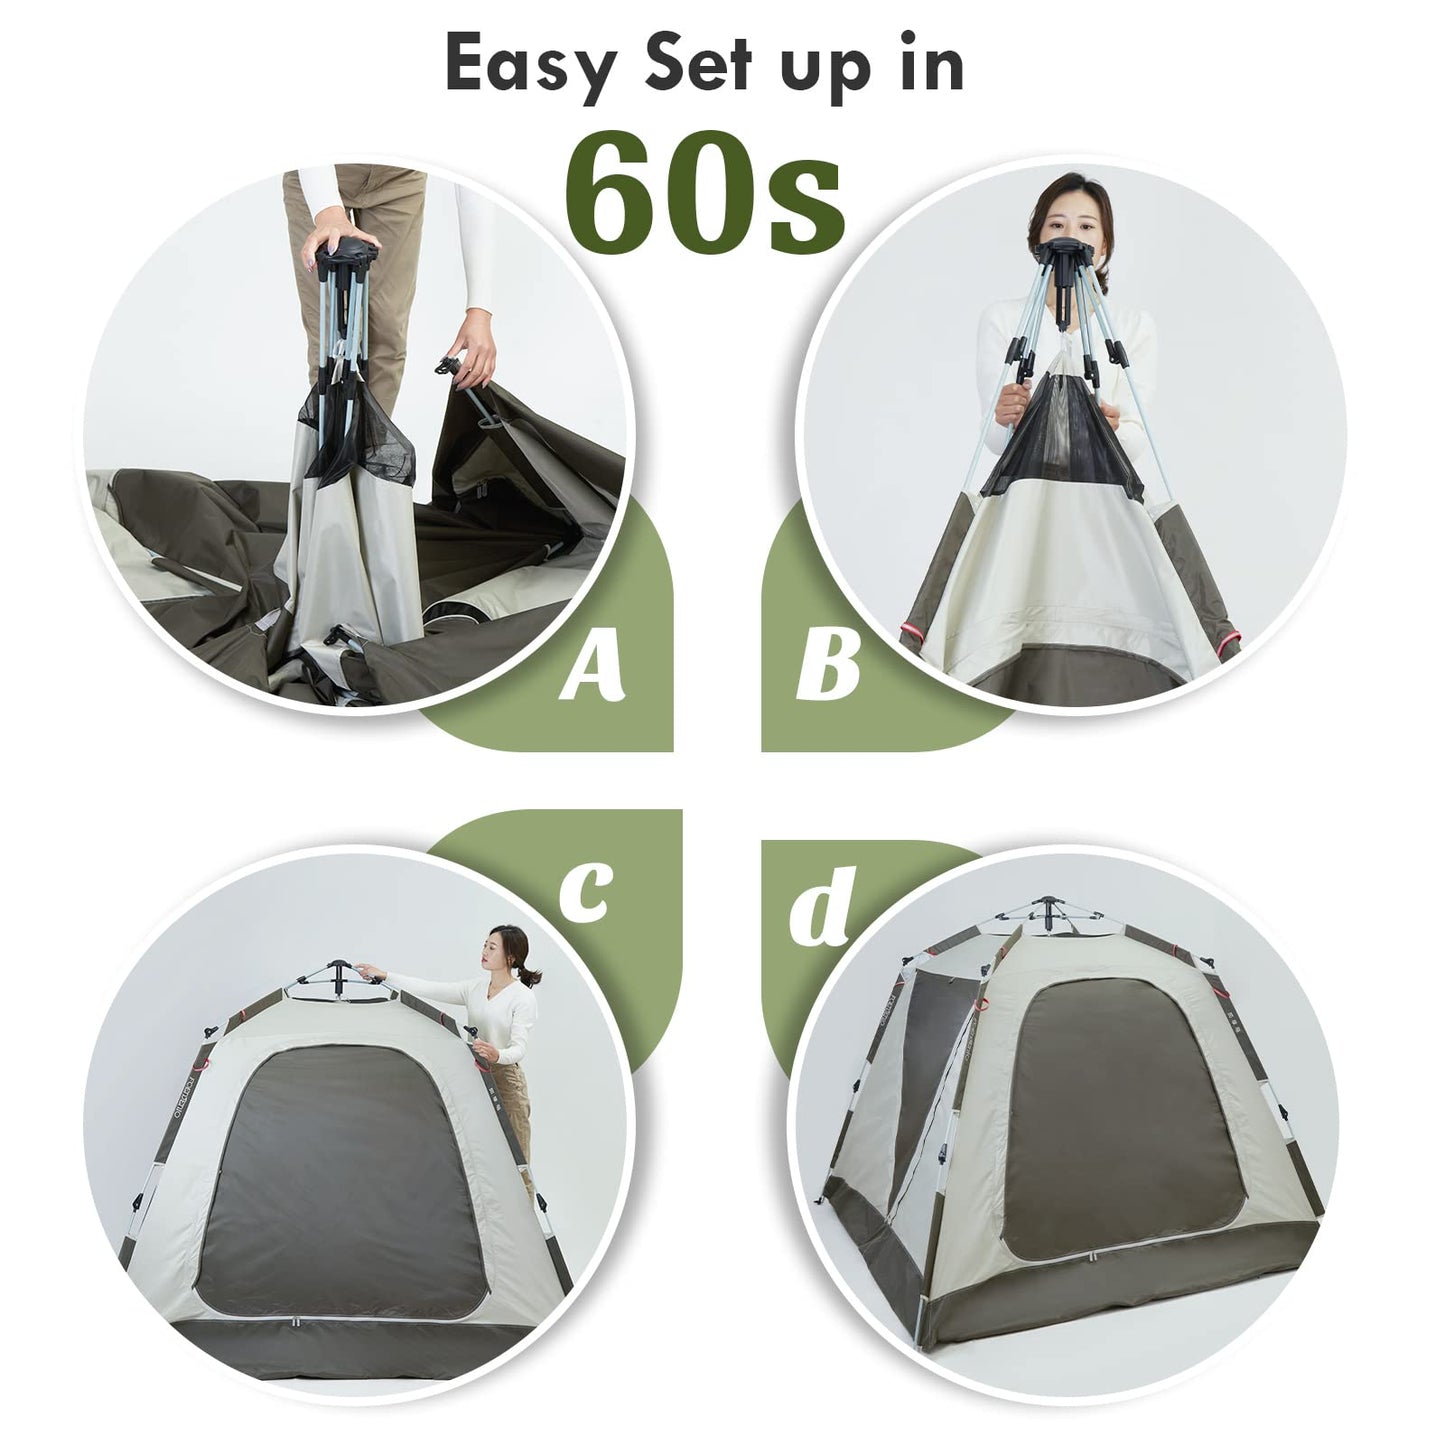 Pop up tent 4 Person Family Camping & Hiking